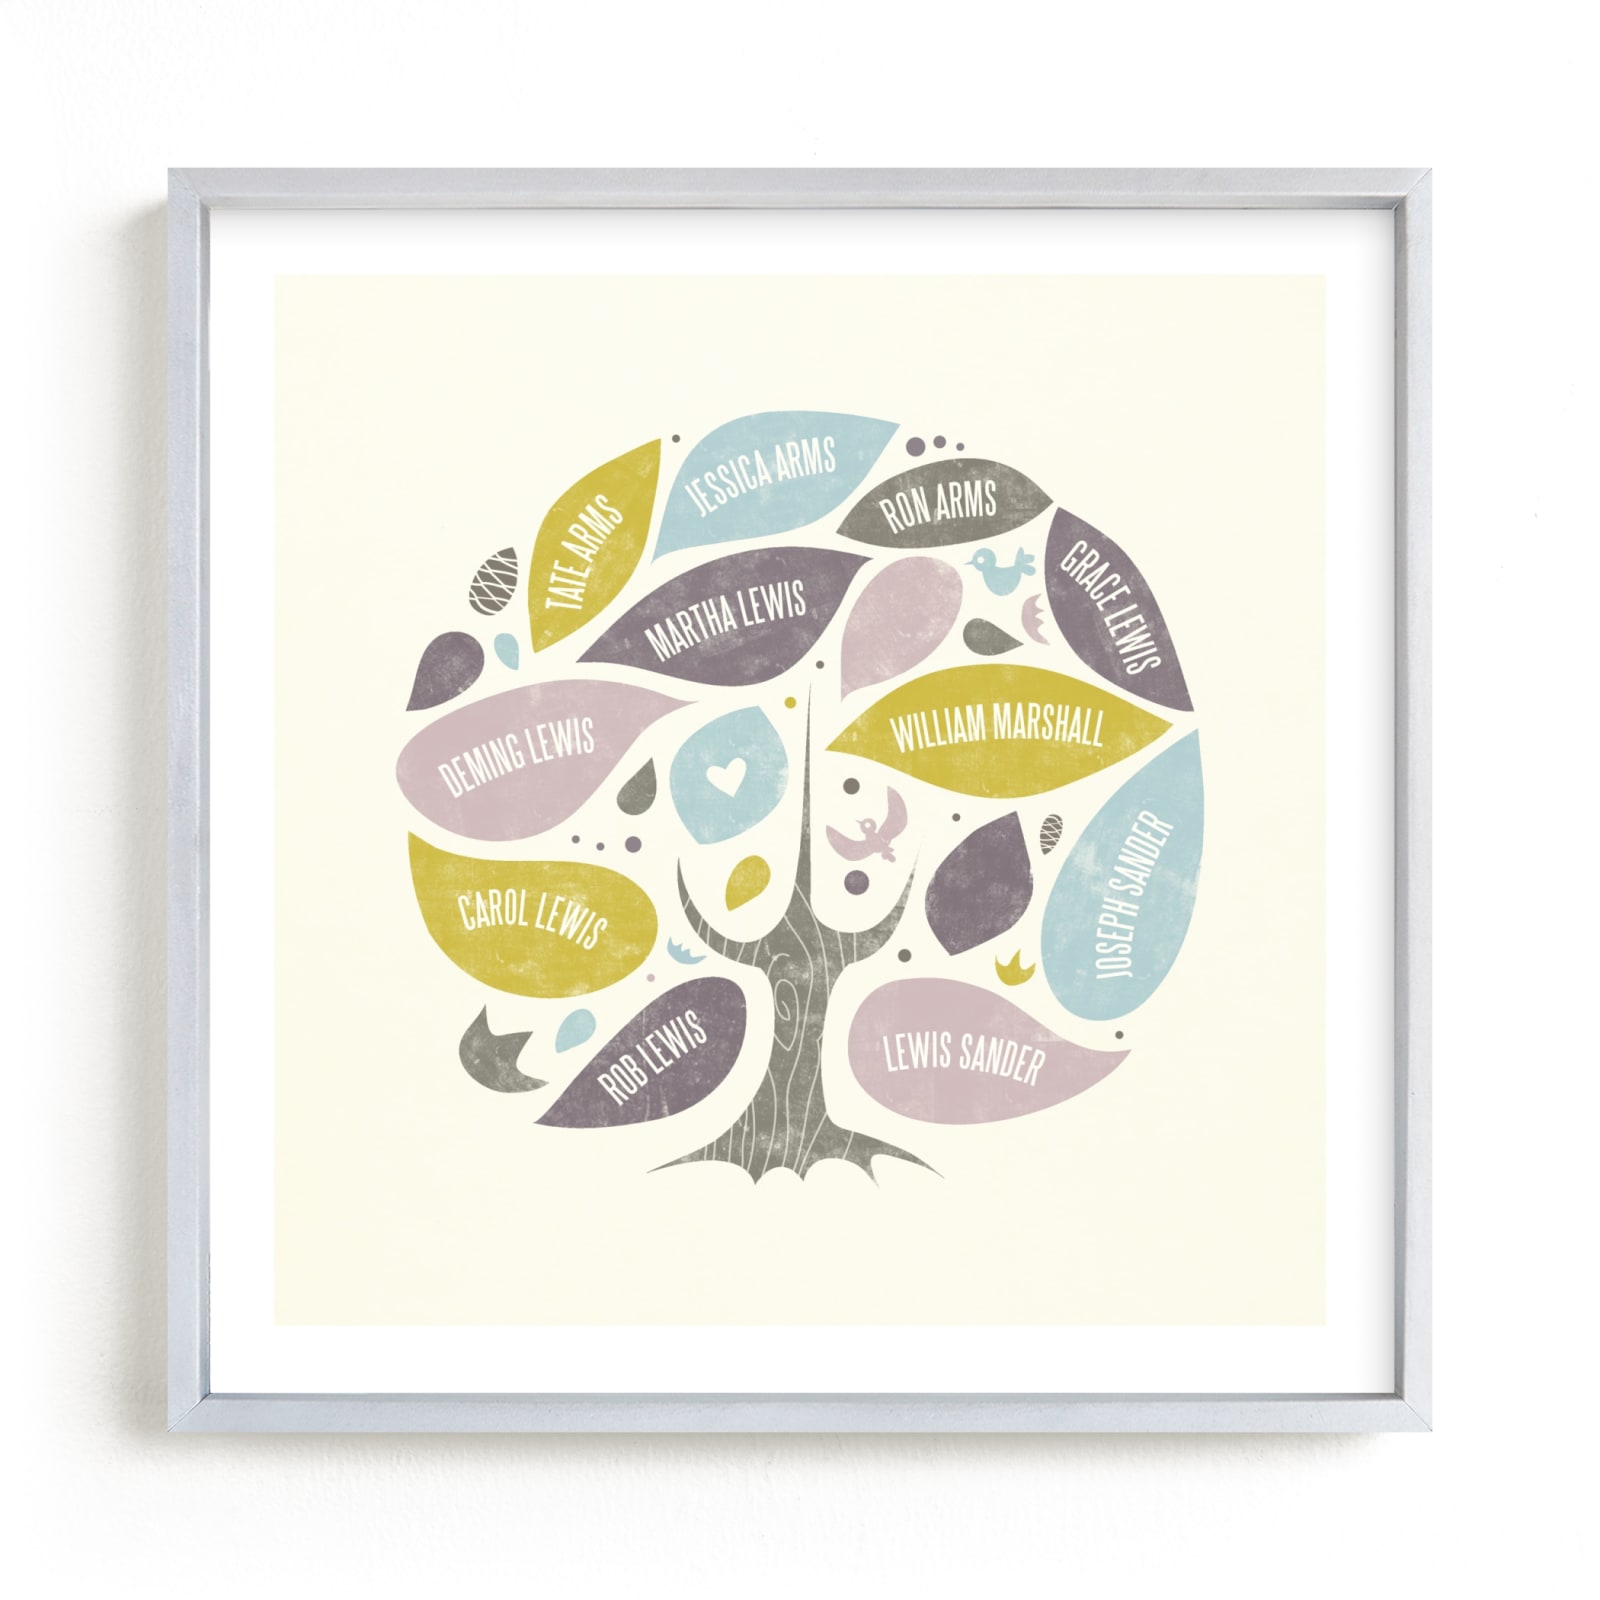 This is a purple family tree art by Heather Francisco called Folk Family Tree.